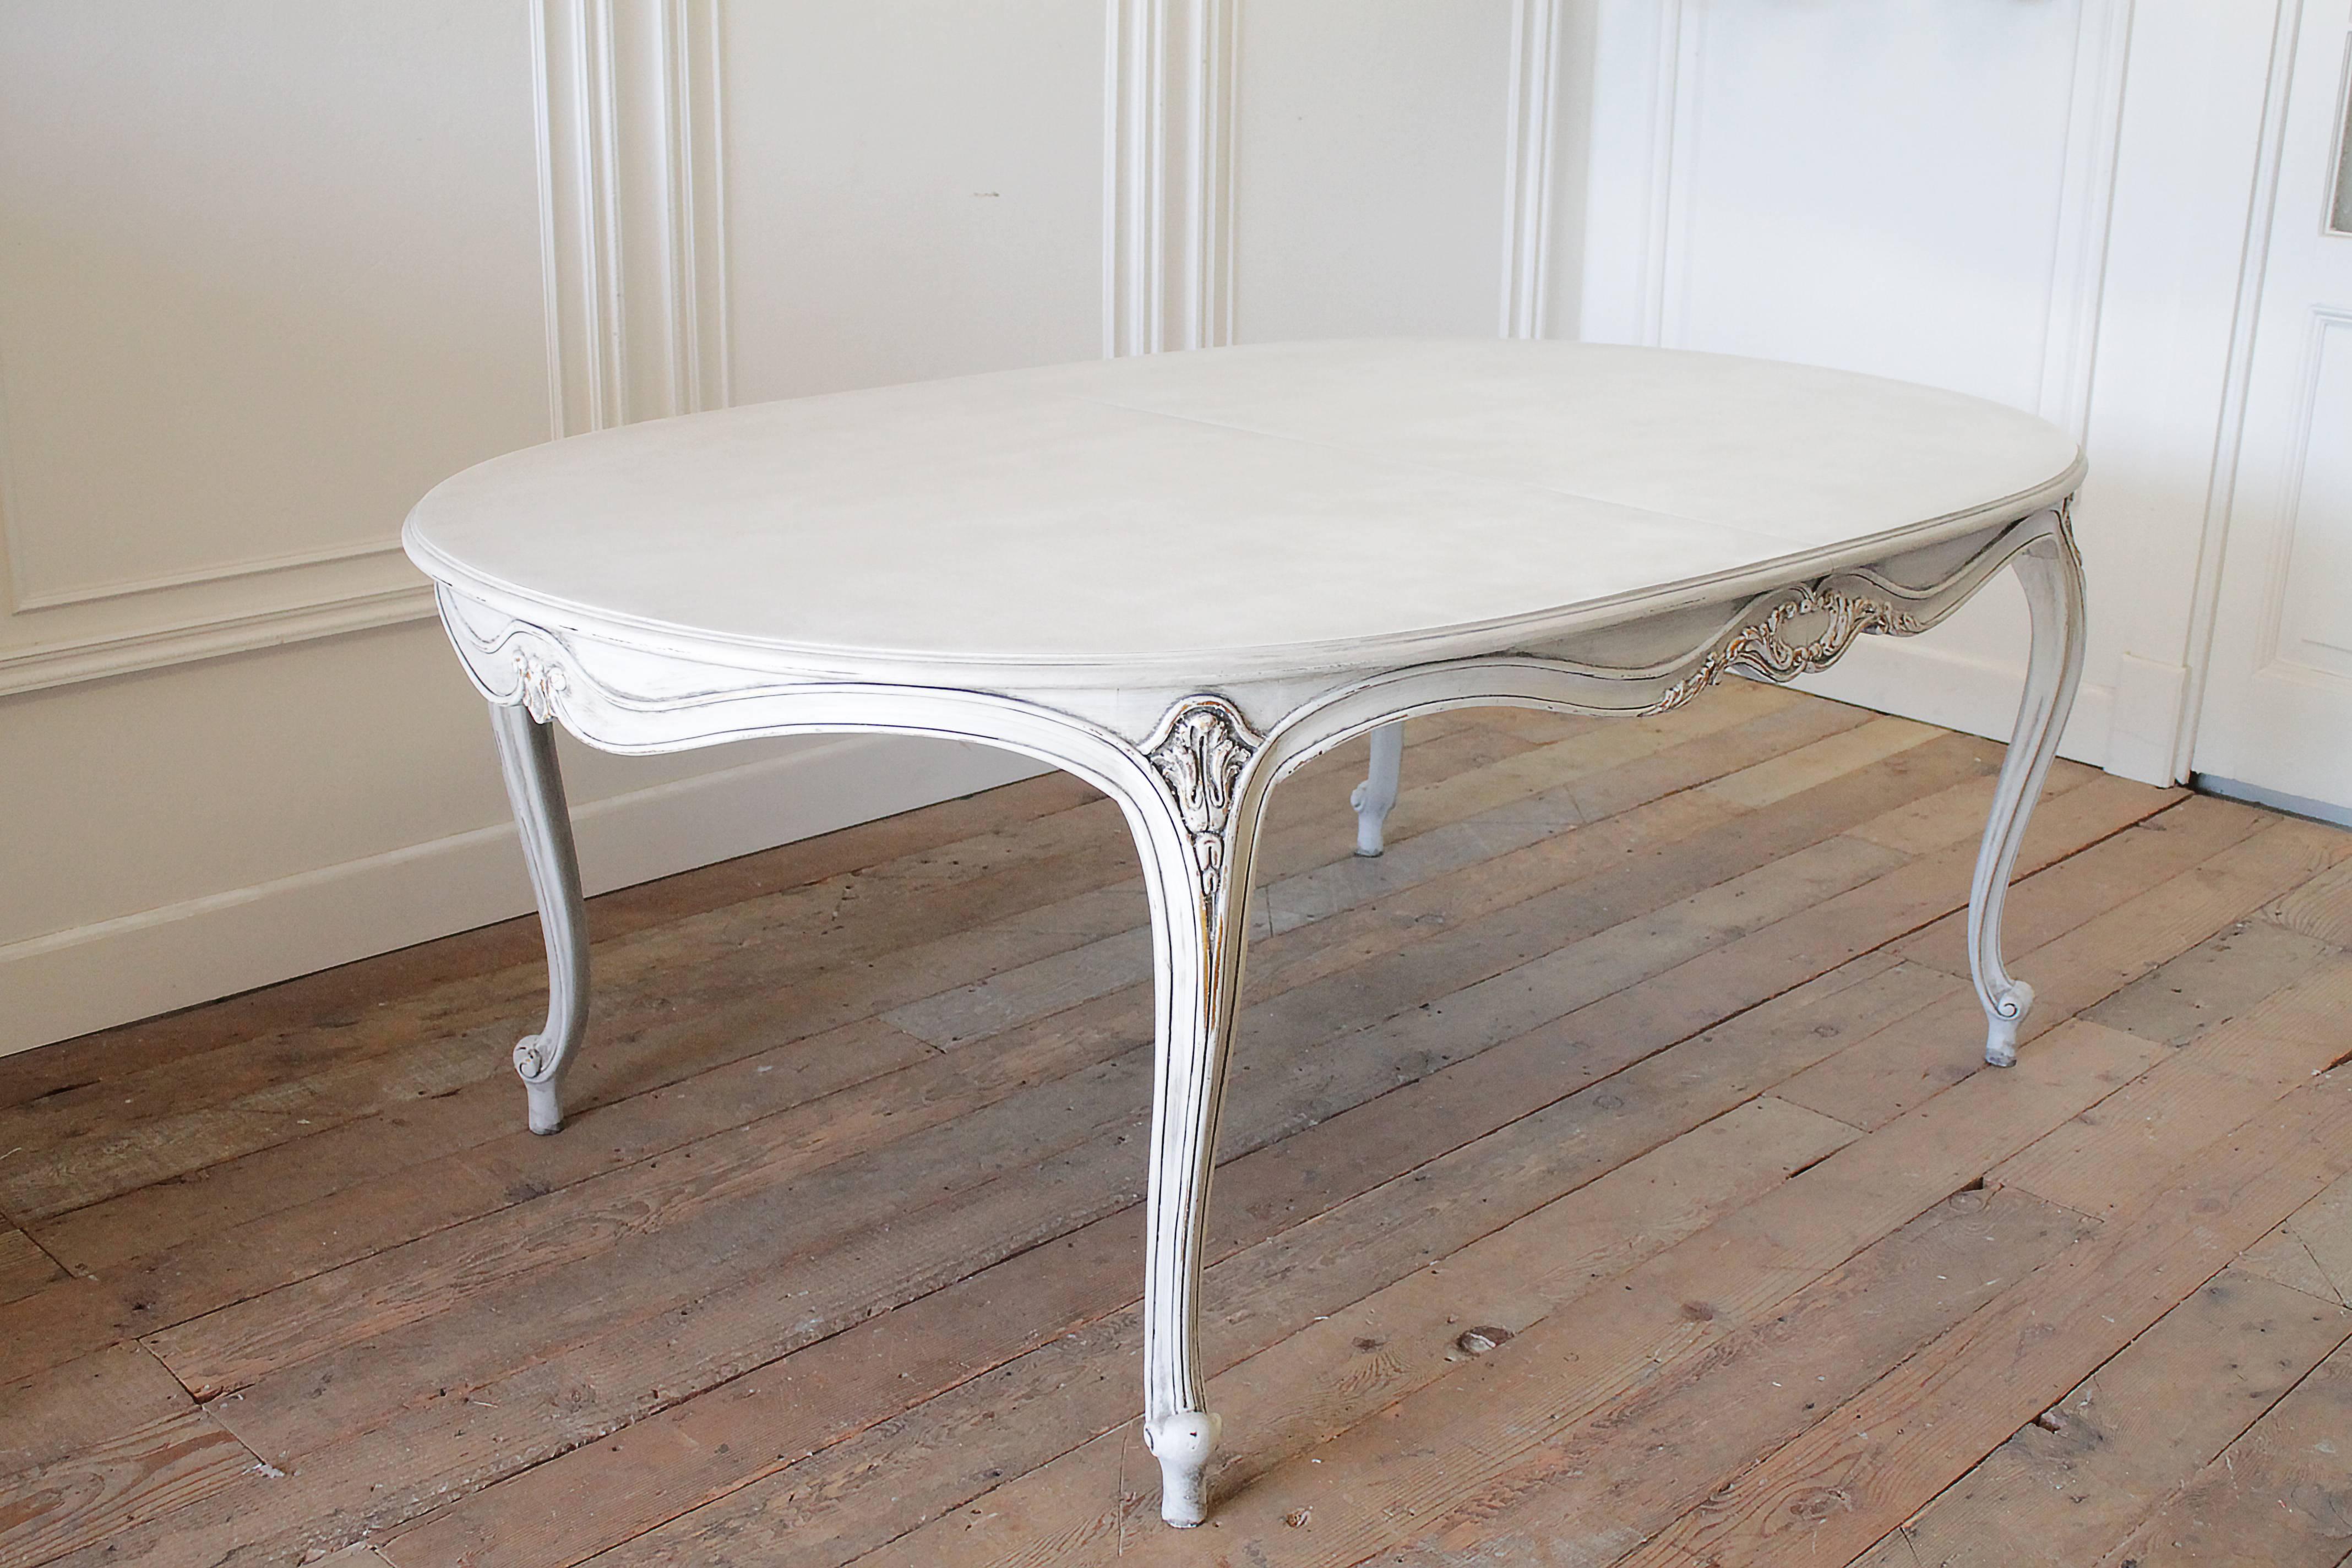 This vintage dining table is beautifully made of high quality solid wood by Karges Furniture. We have custom finished this piece in our antique oyster white, which is a soft white, with distressing, and a hand glazed finish which tints this in a